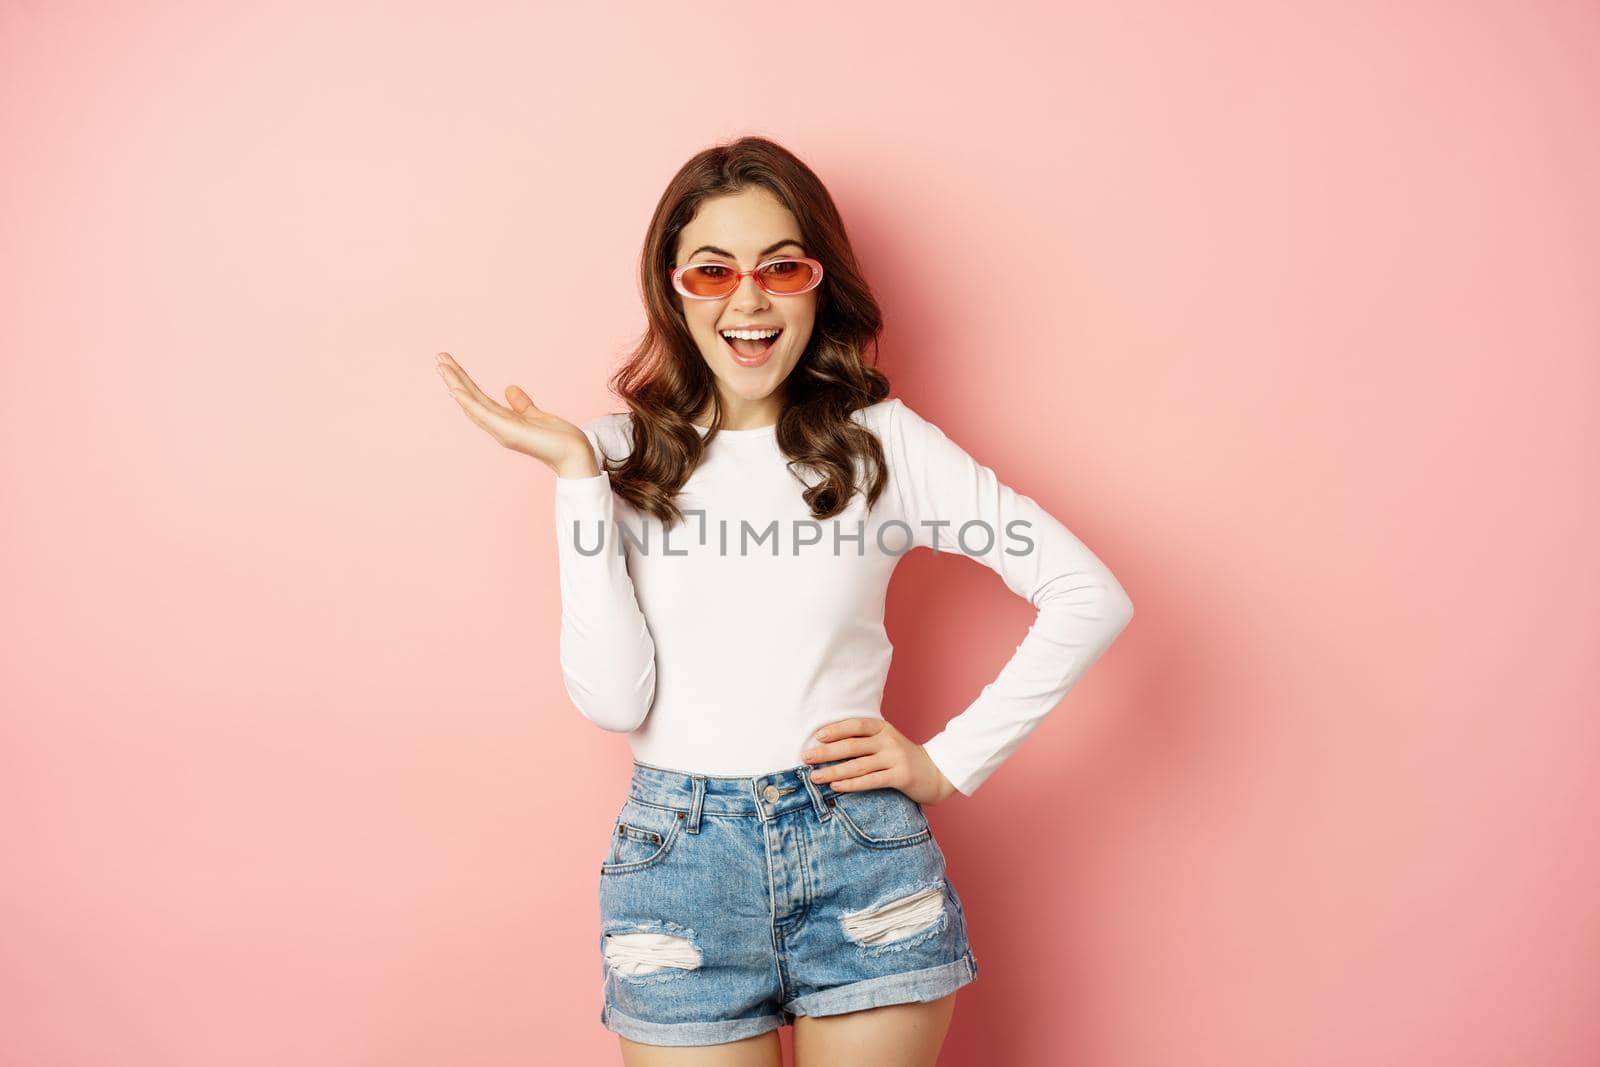 Coquettish and stylish brunette girl, laughing and smiling, wearing sunglasses, wearing white blouse and jeans, pink background. Copy space